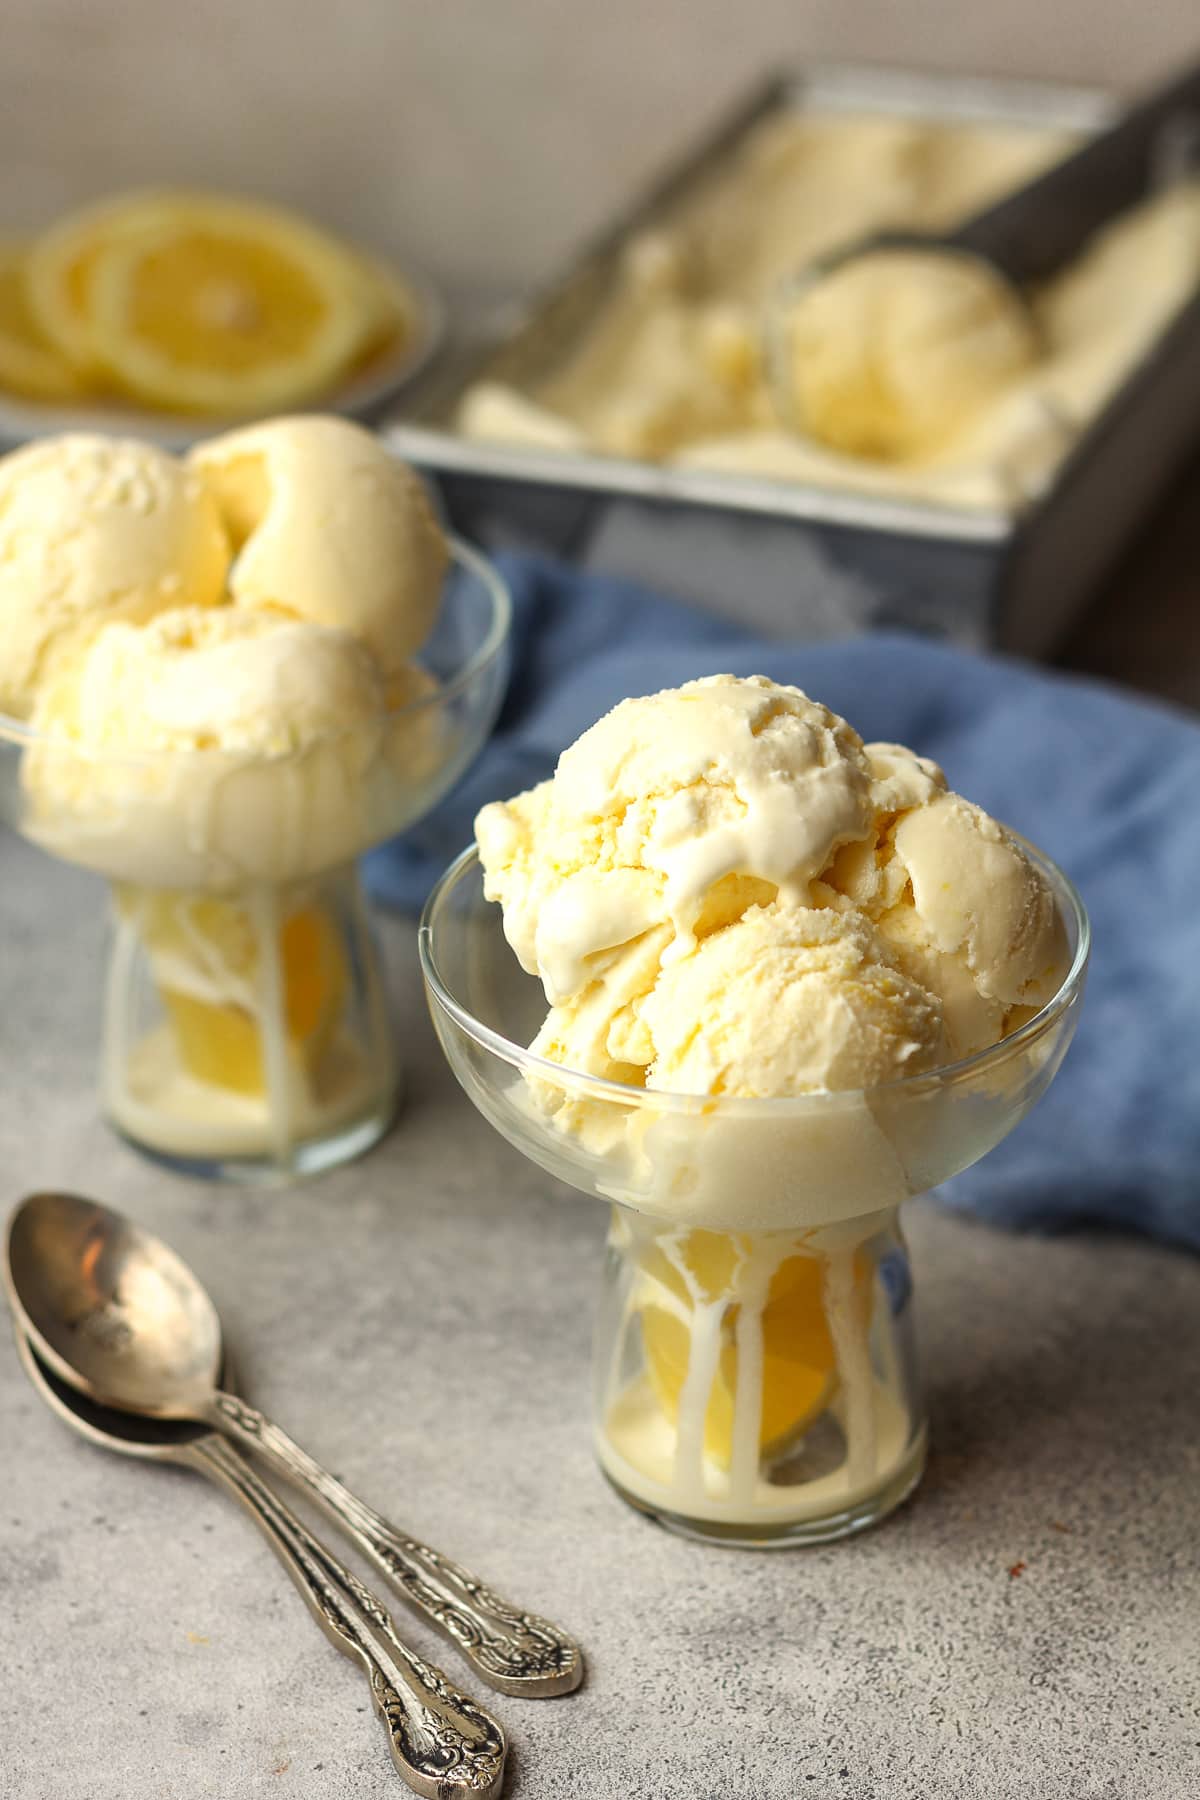 Overhead view of two bowls of lemon ice cream with spoons.